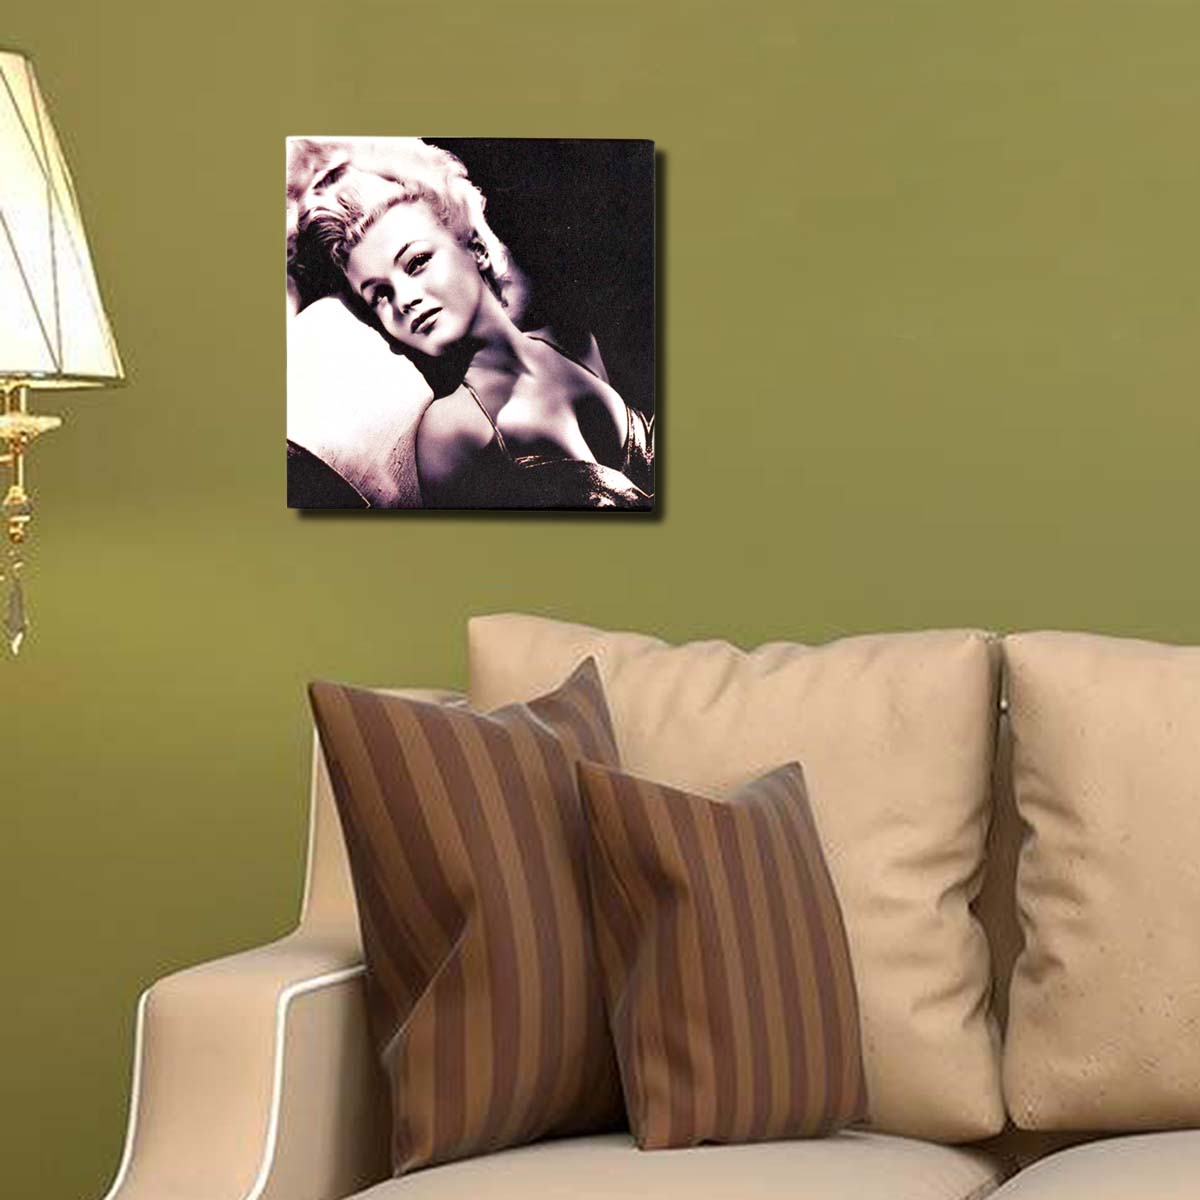 Kookee Canvas Modern Wall , Marilyn Monroe Painting for Home Living Room, Bedroom, Office Decor Ready to Hang (20cmx20cm) (F1-595118-4)